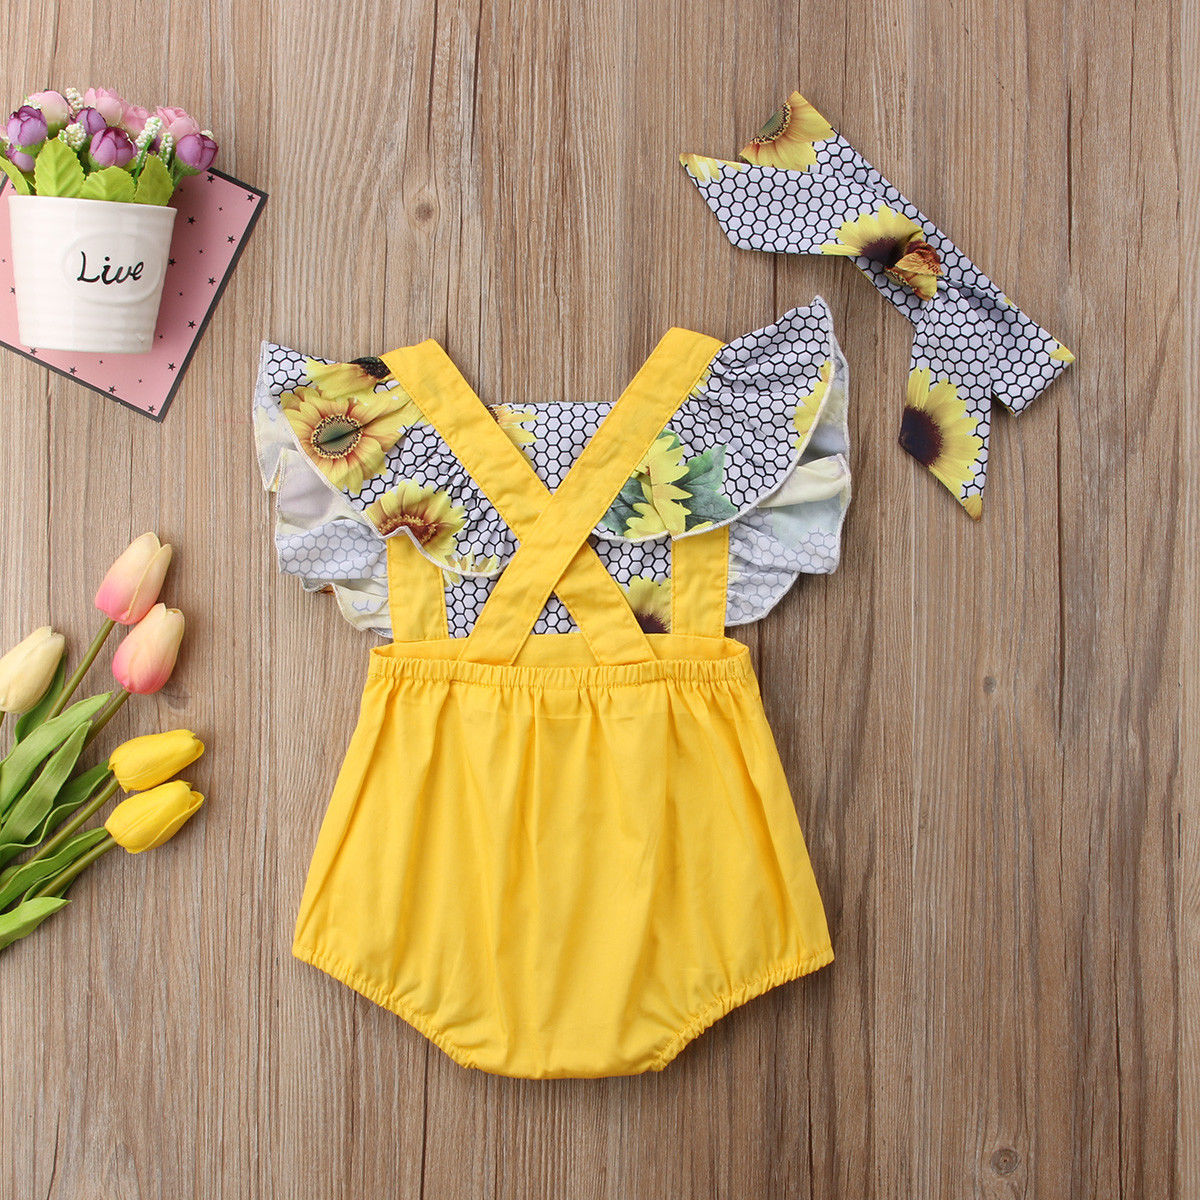 

New Baby Girls Ruffles Sunflower Romper Infant Fake two pieces Jumpsuit Outfit  Sunsuit Clothes baby clothing, Default color